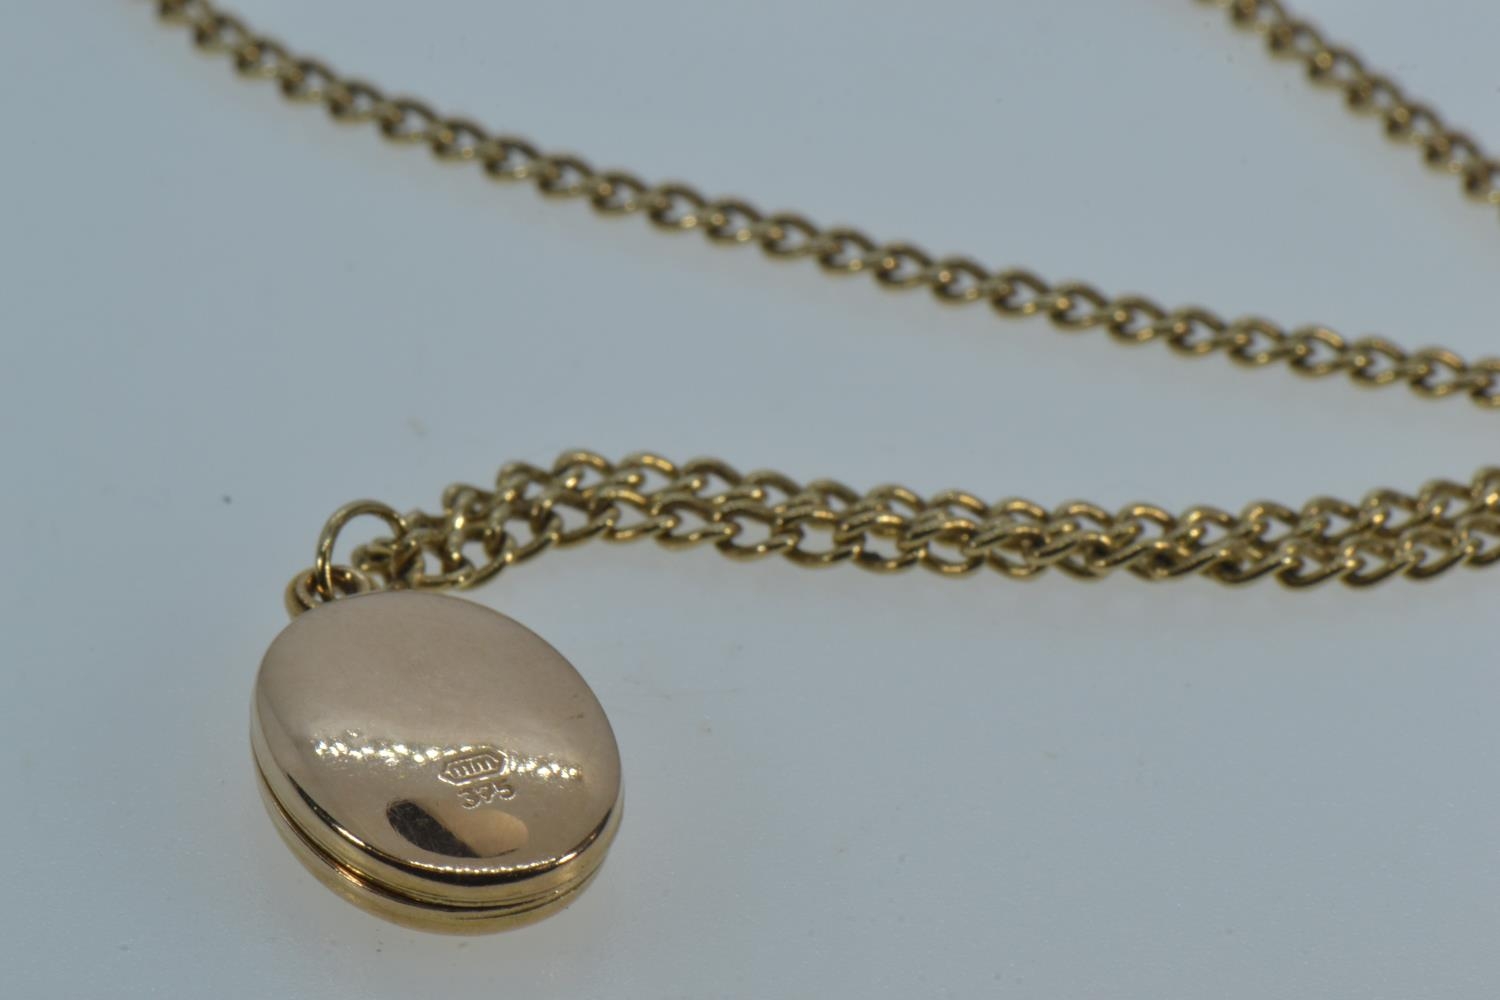 9ct gold locket & neck chain, locket length including link/bale 22mm, chain circumference 525mm, gro - Image 3 of 3